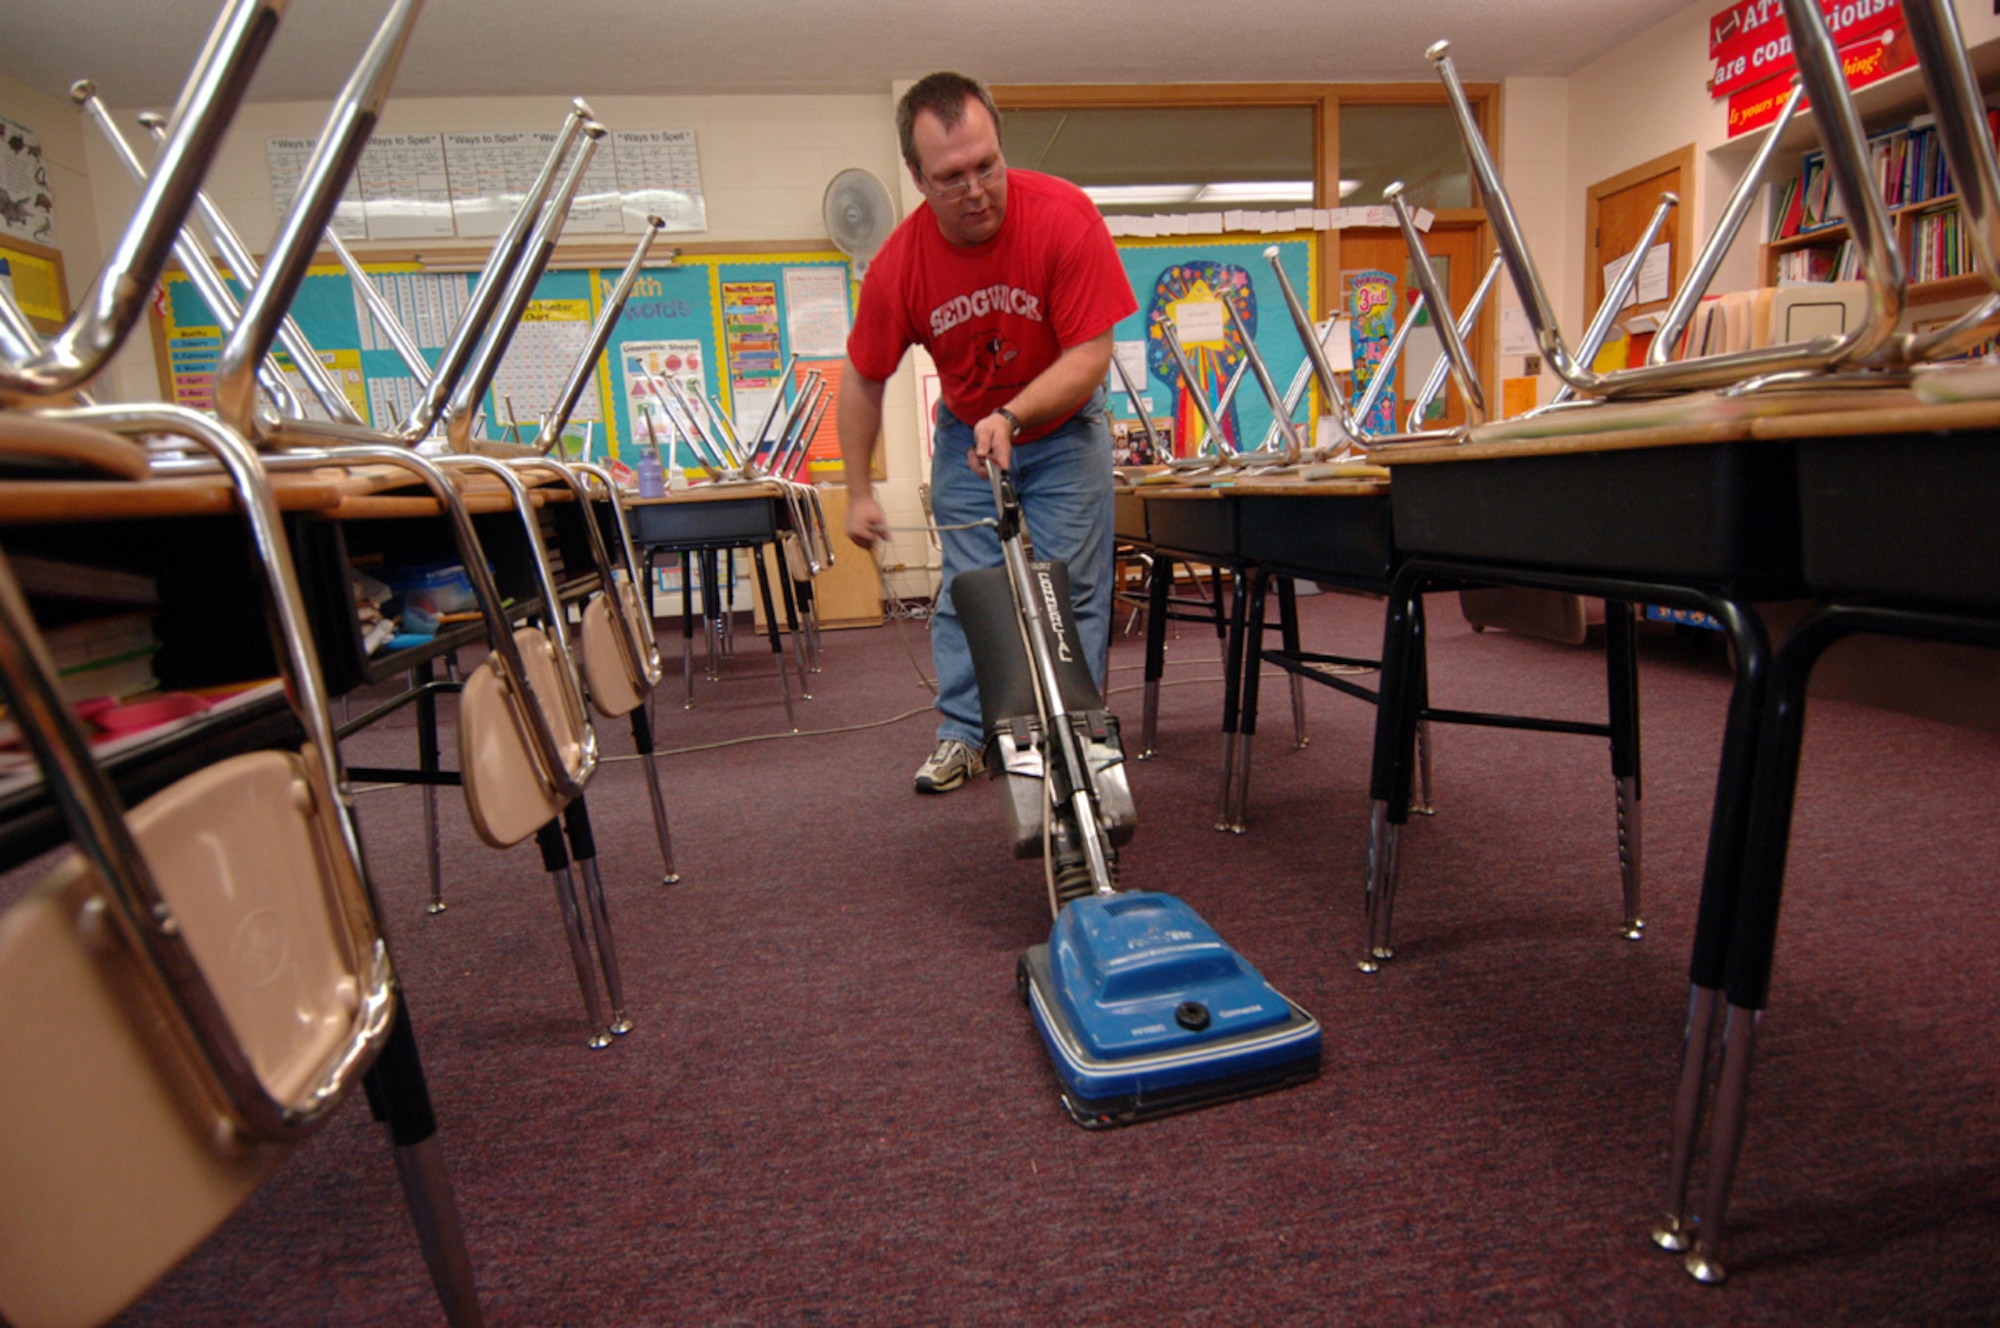 Shelby vacuums a classroom at an elementary school a few blocks from his home. His new job as a janitor involves harder work than the job he was not allowed to return to because of his injury, he said. (Air Force Photo/Tech. Sgt. Jason Schaap)